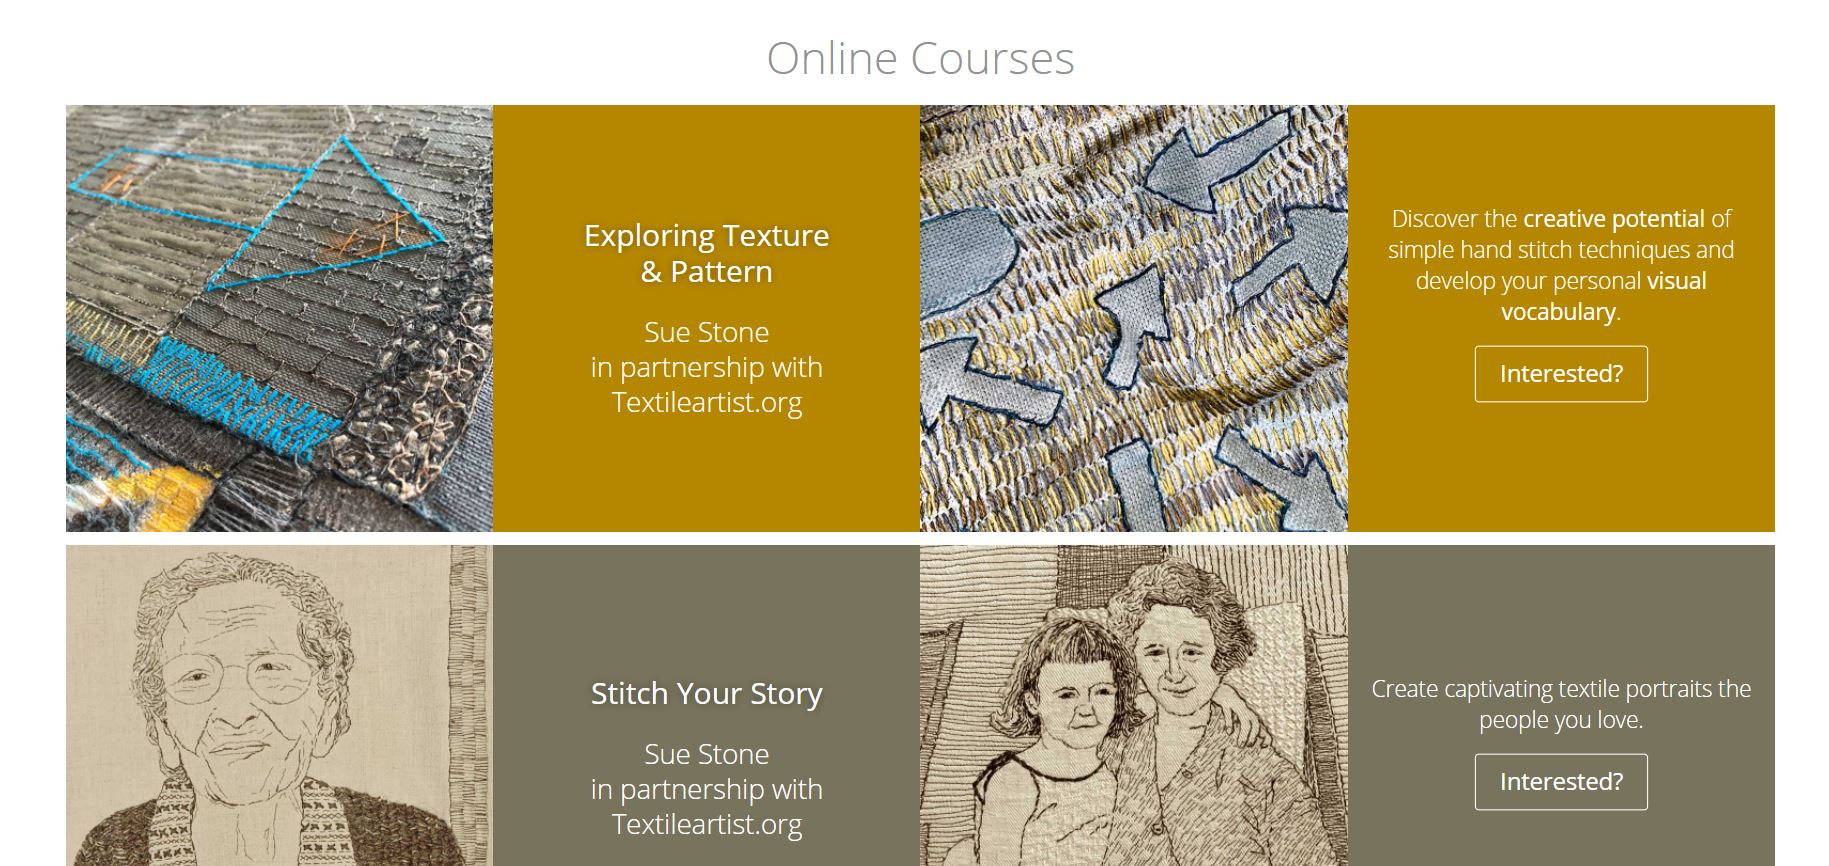 Online course_exploring textile and patterns